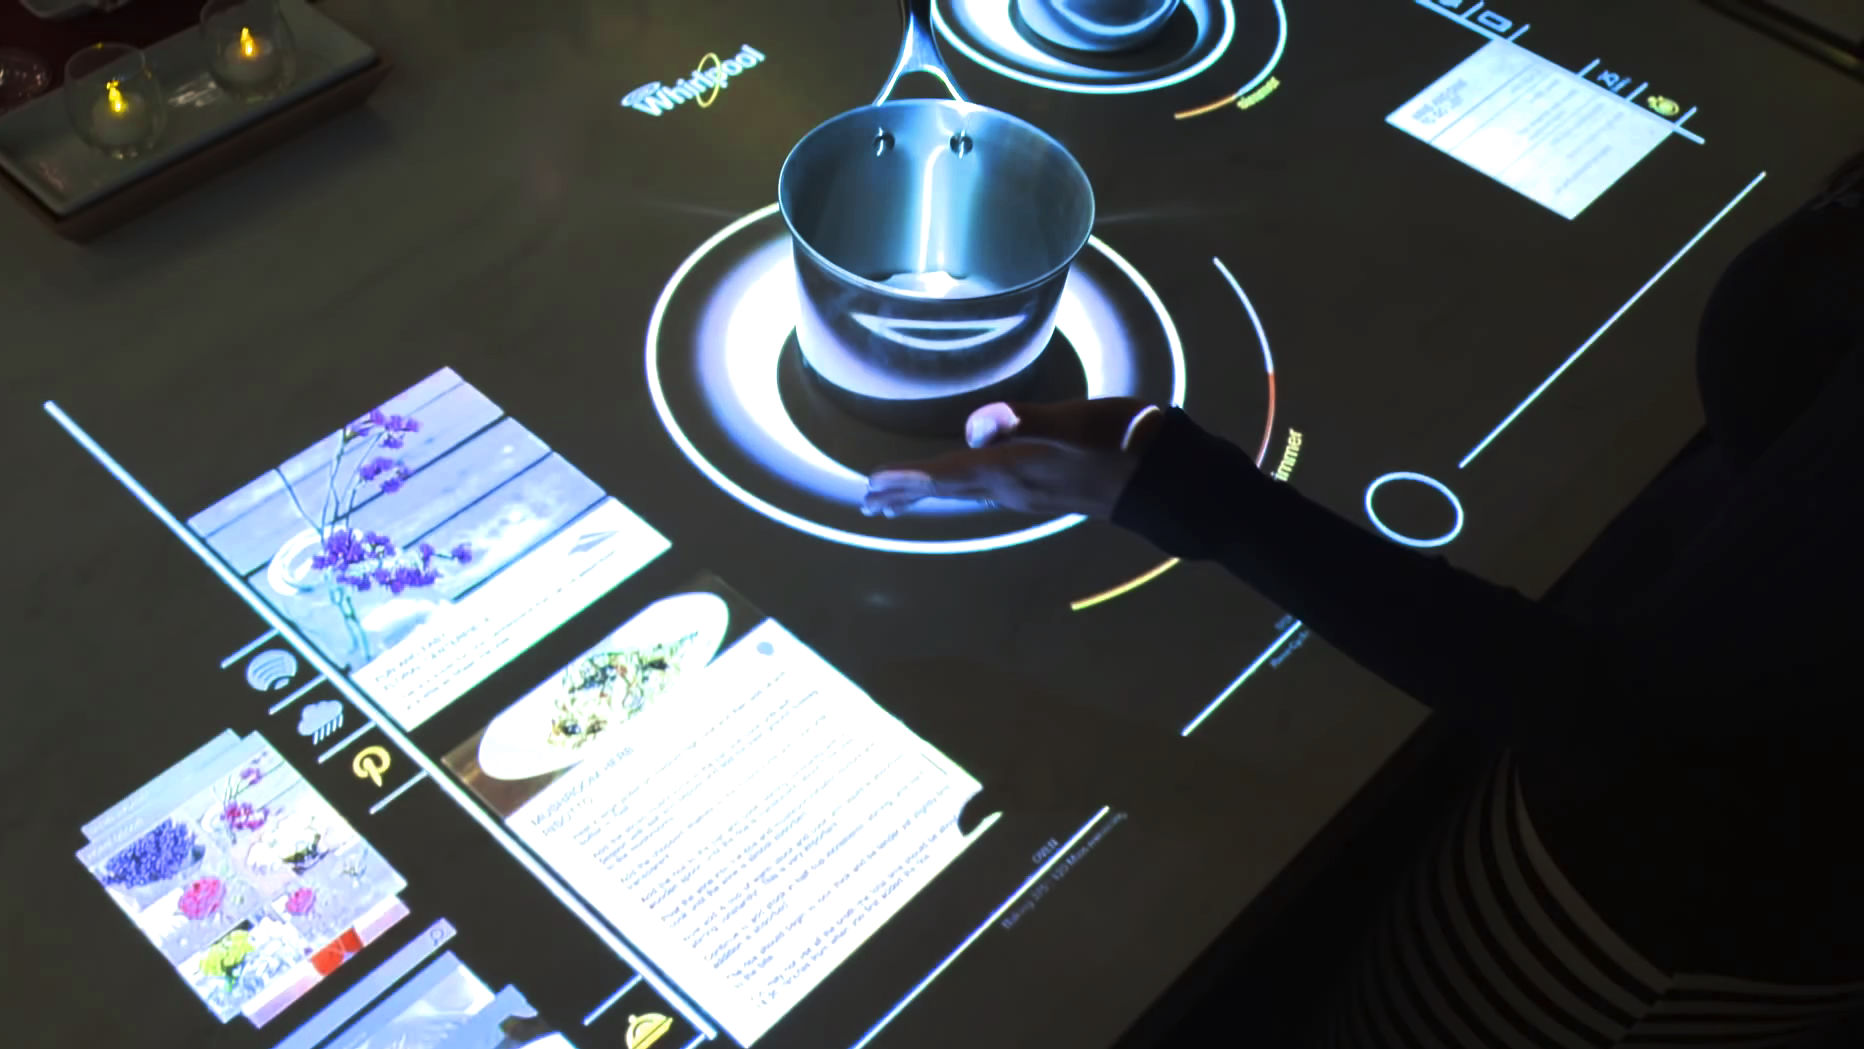 Plateau Formålet kaskade Interactive Cooktop with near-future stove that allows you to search  recipes, SNS, and mail with touch panel - GIGAZINE